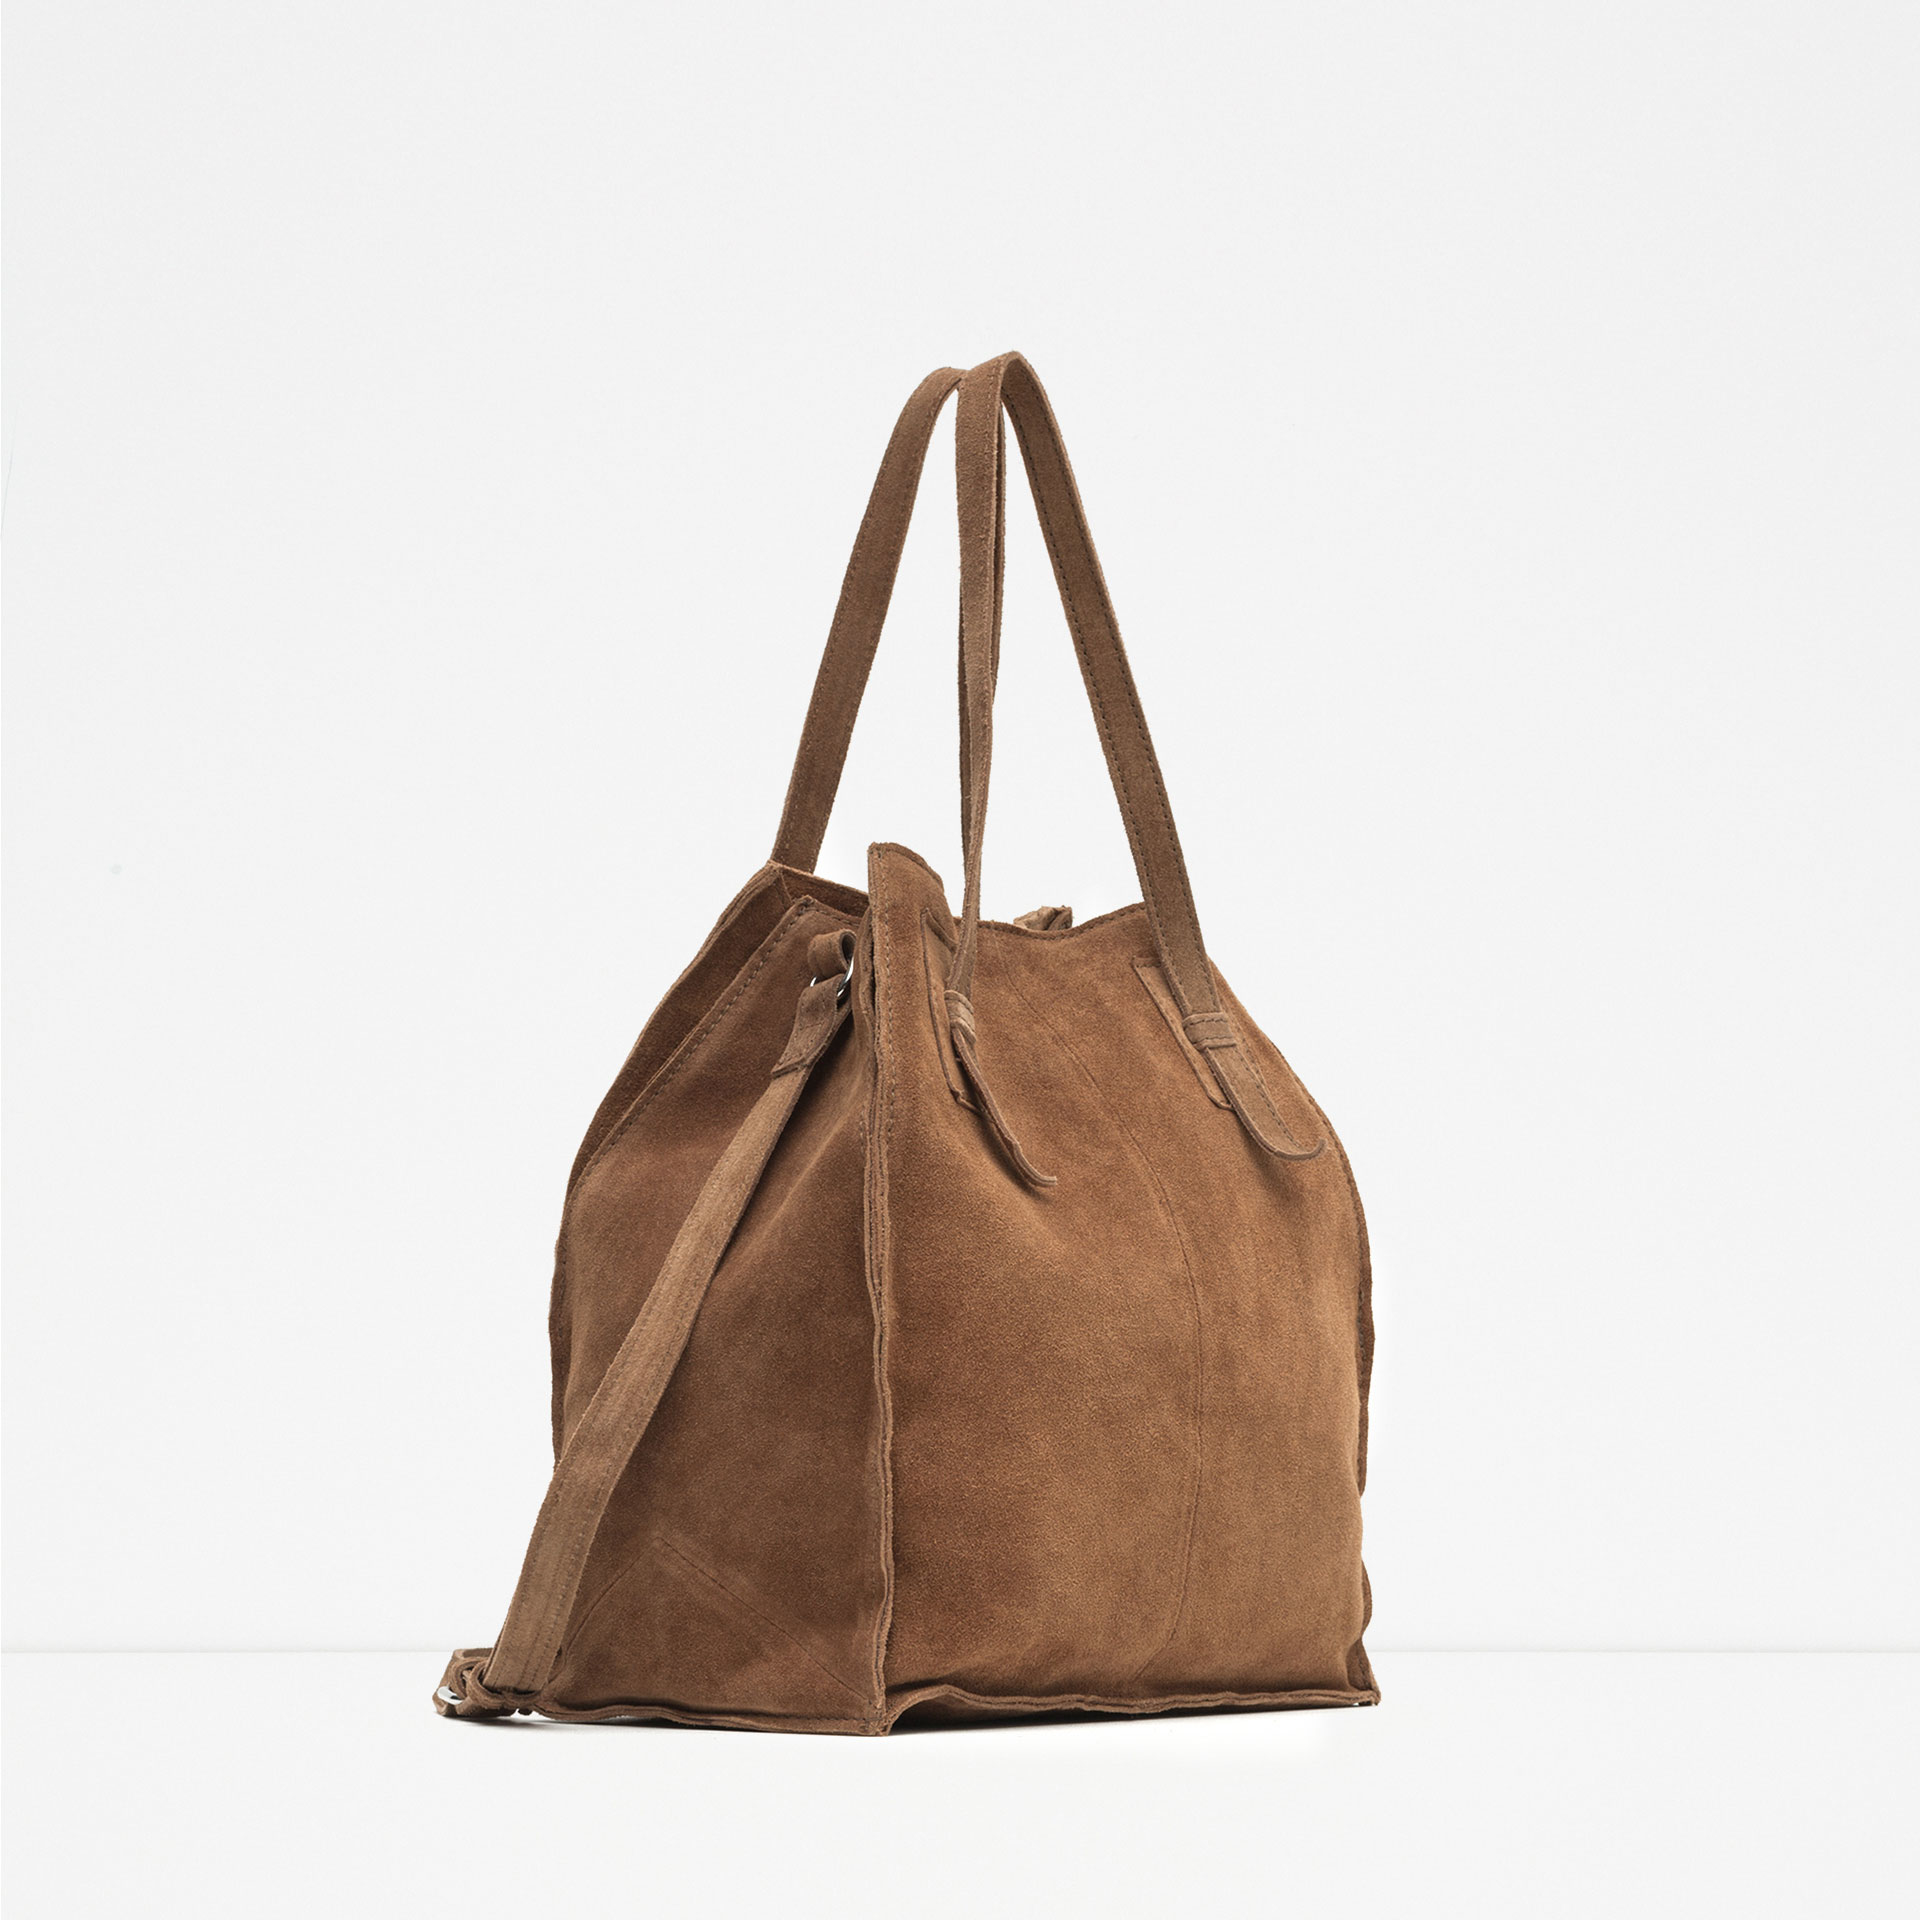 Zara Suede Tote Bag in Brown (Leather) | Lyst